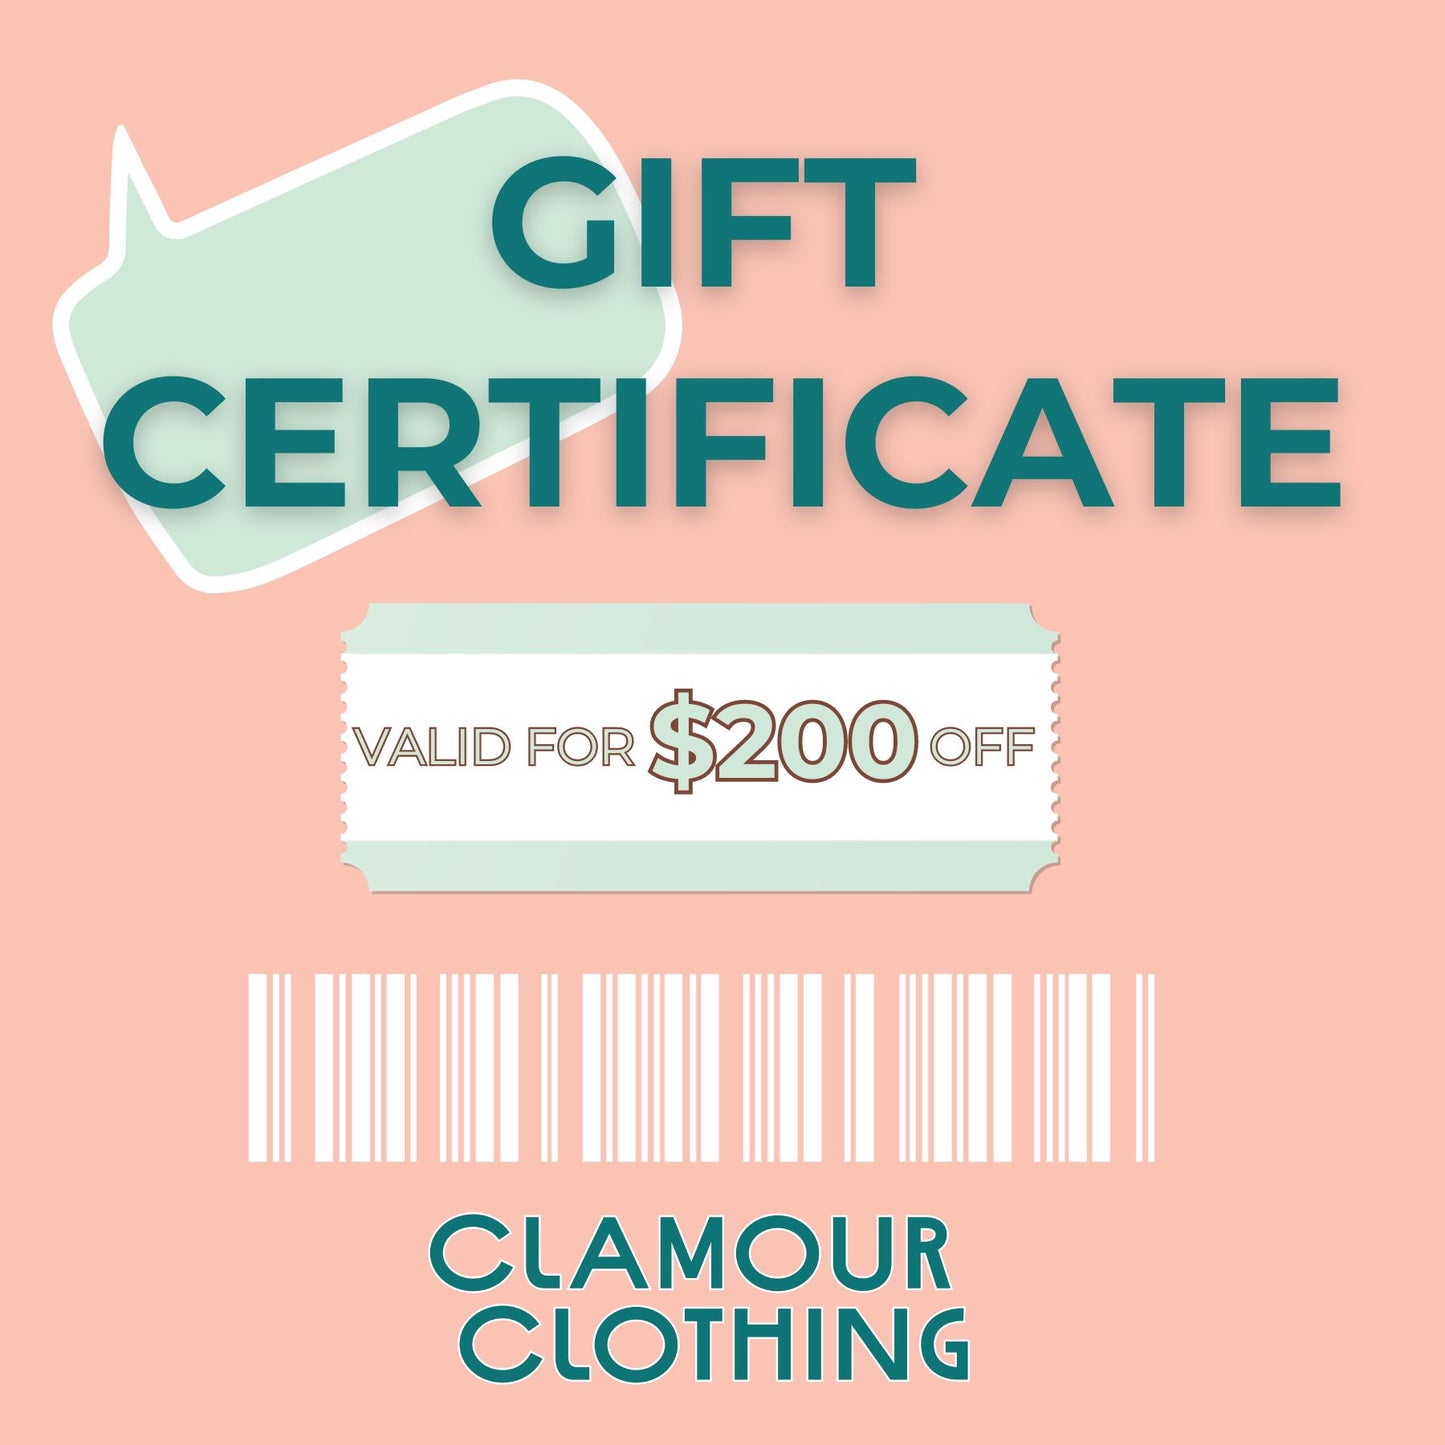 Clamour Clothing Gift Certificate